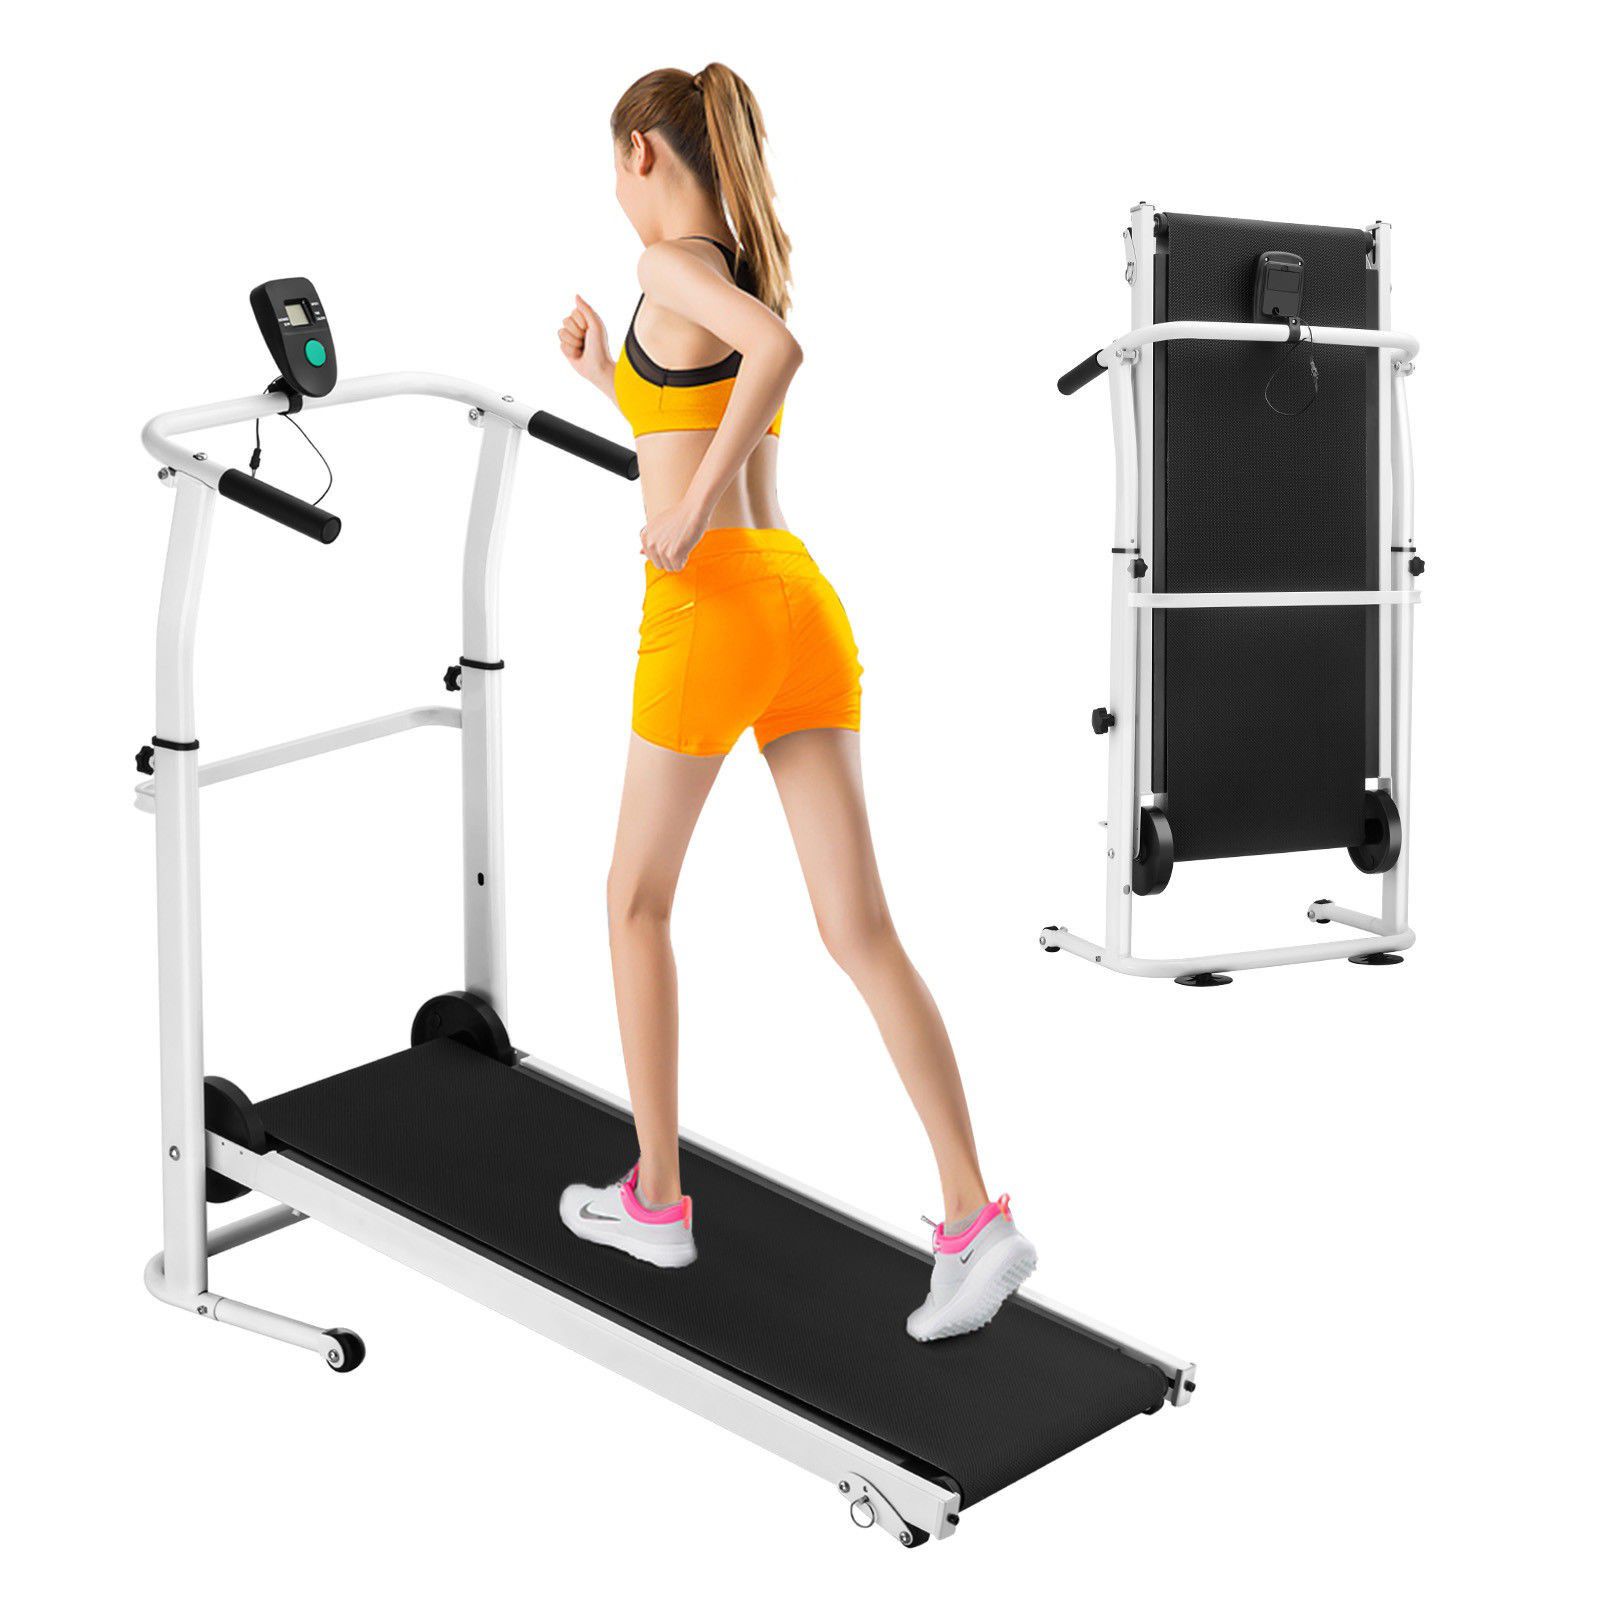 NEW Portable Treadmill Fitness Exercise for home workout living area bedroom backyard gym